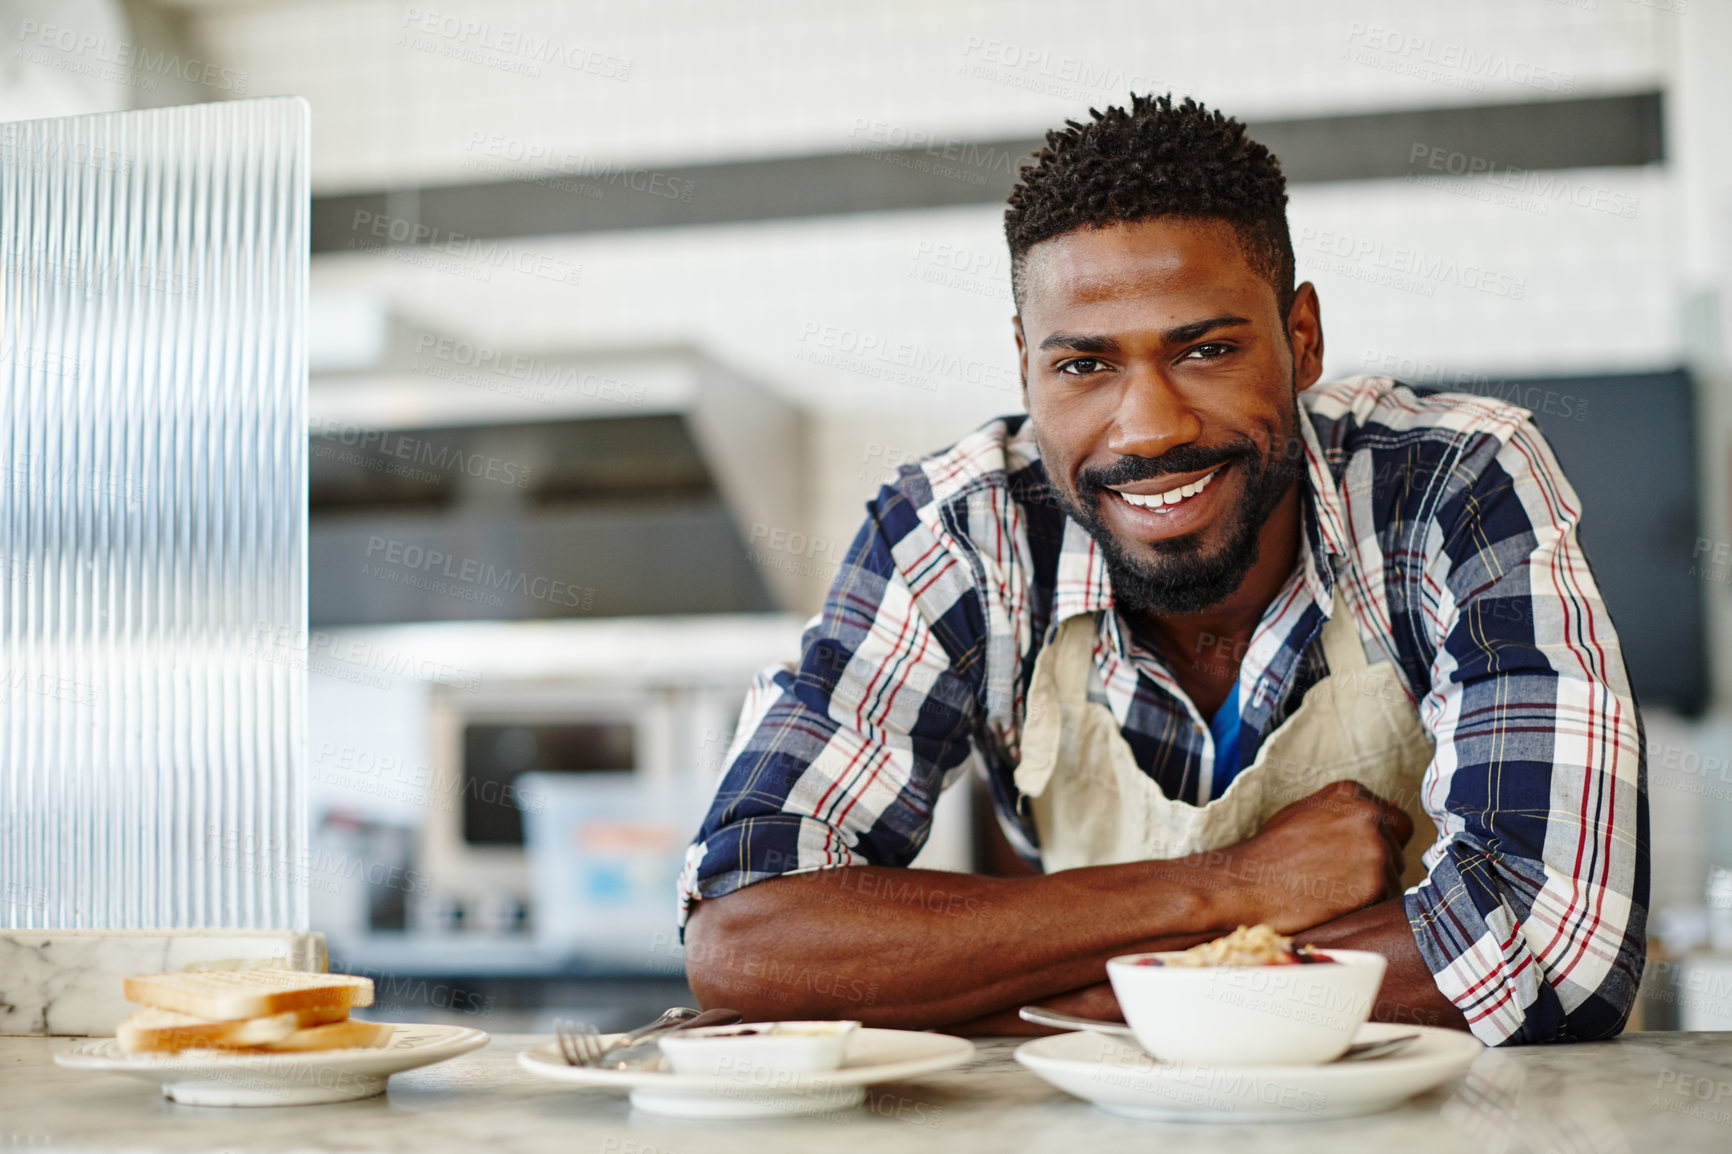 Buy stock photo Cropped portrait of a handsome young man working in a coffee shop